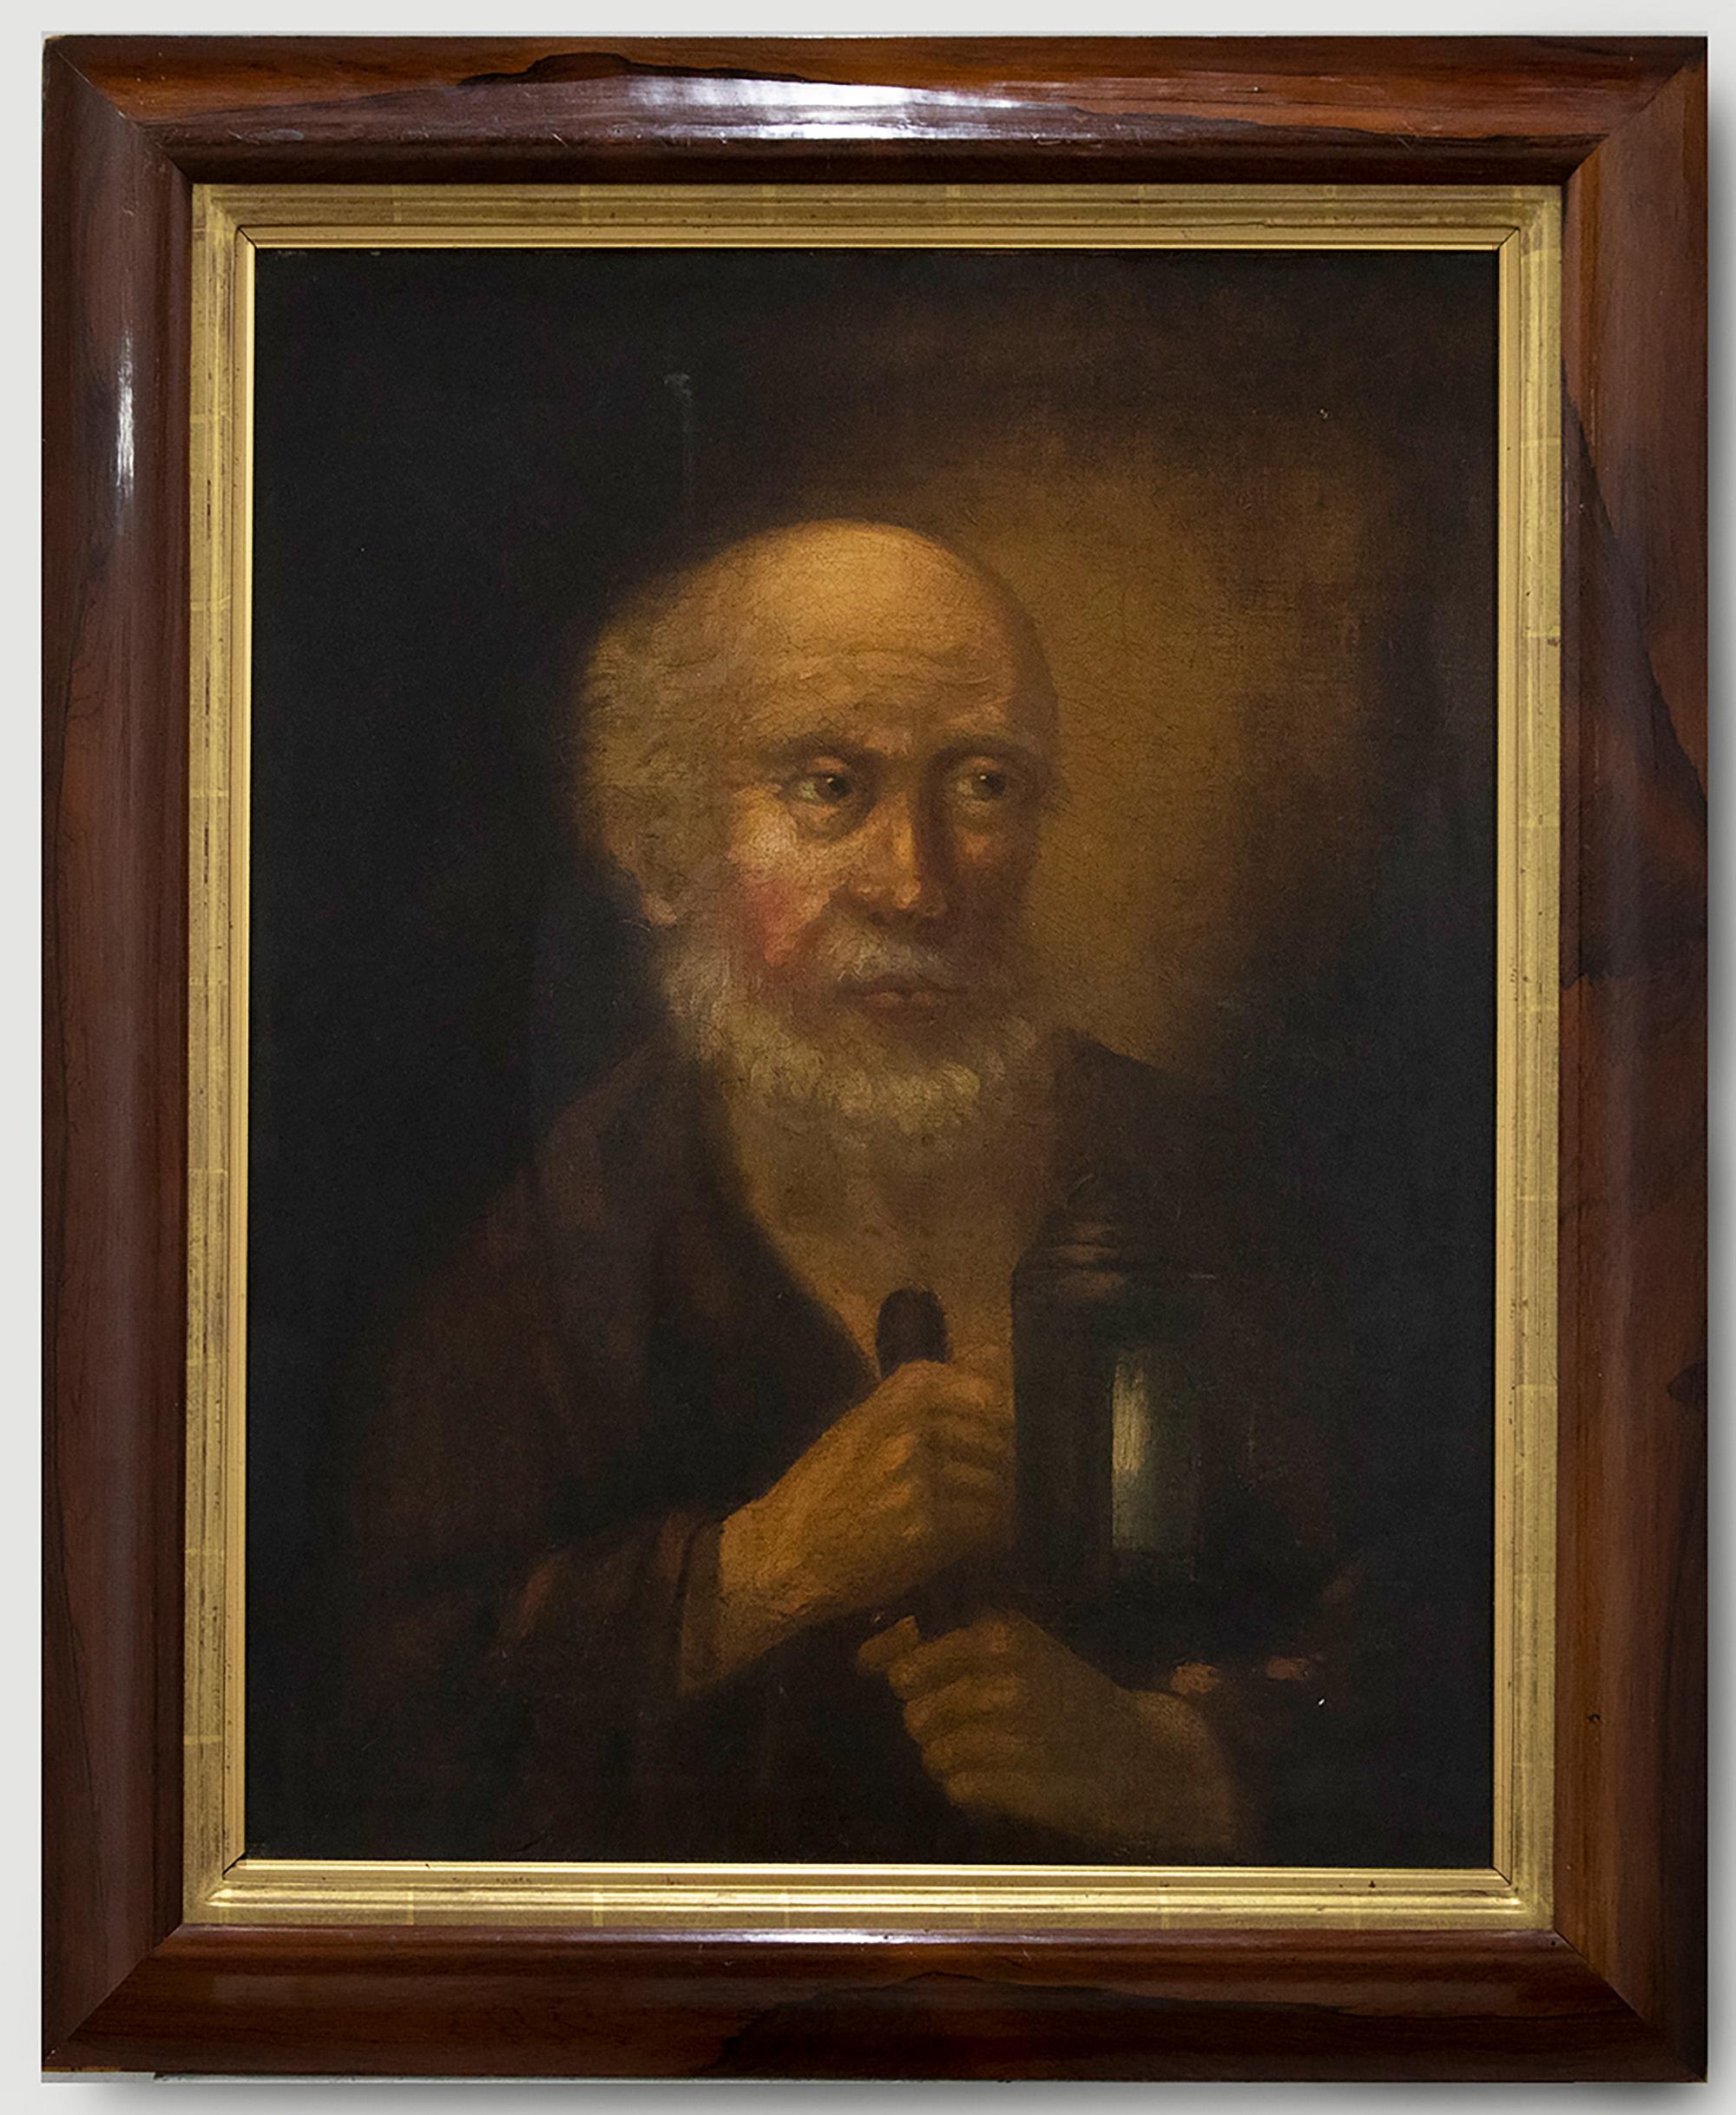 19th Century Oil - Monk Holding a Lamp - Painting by Unknown